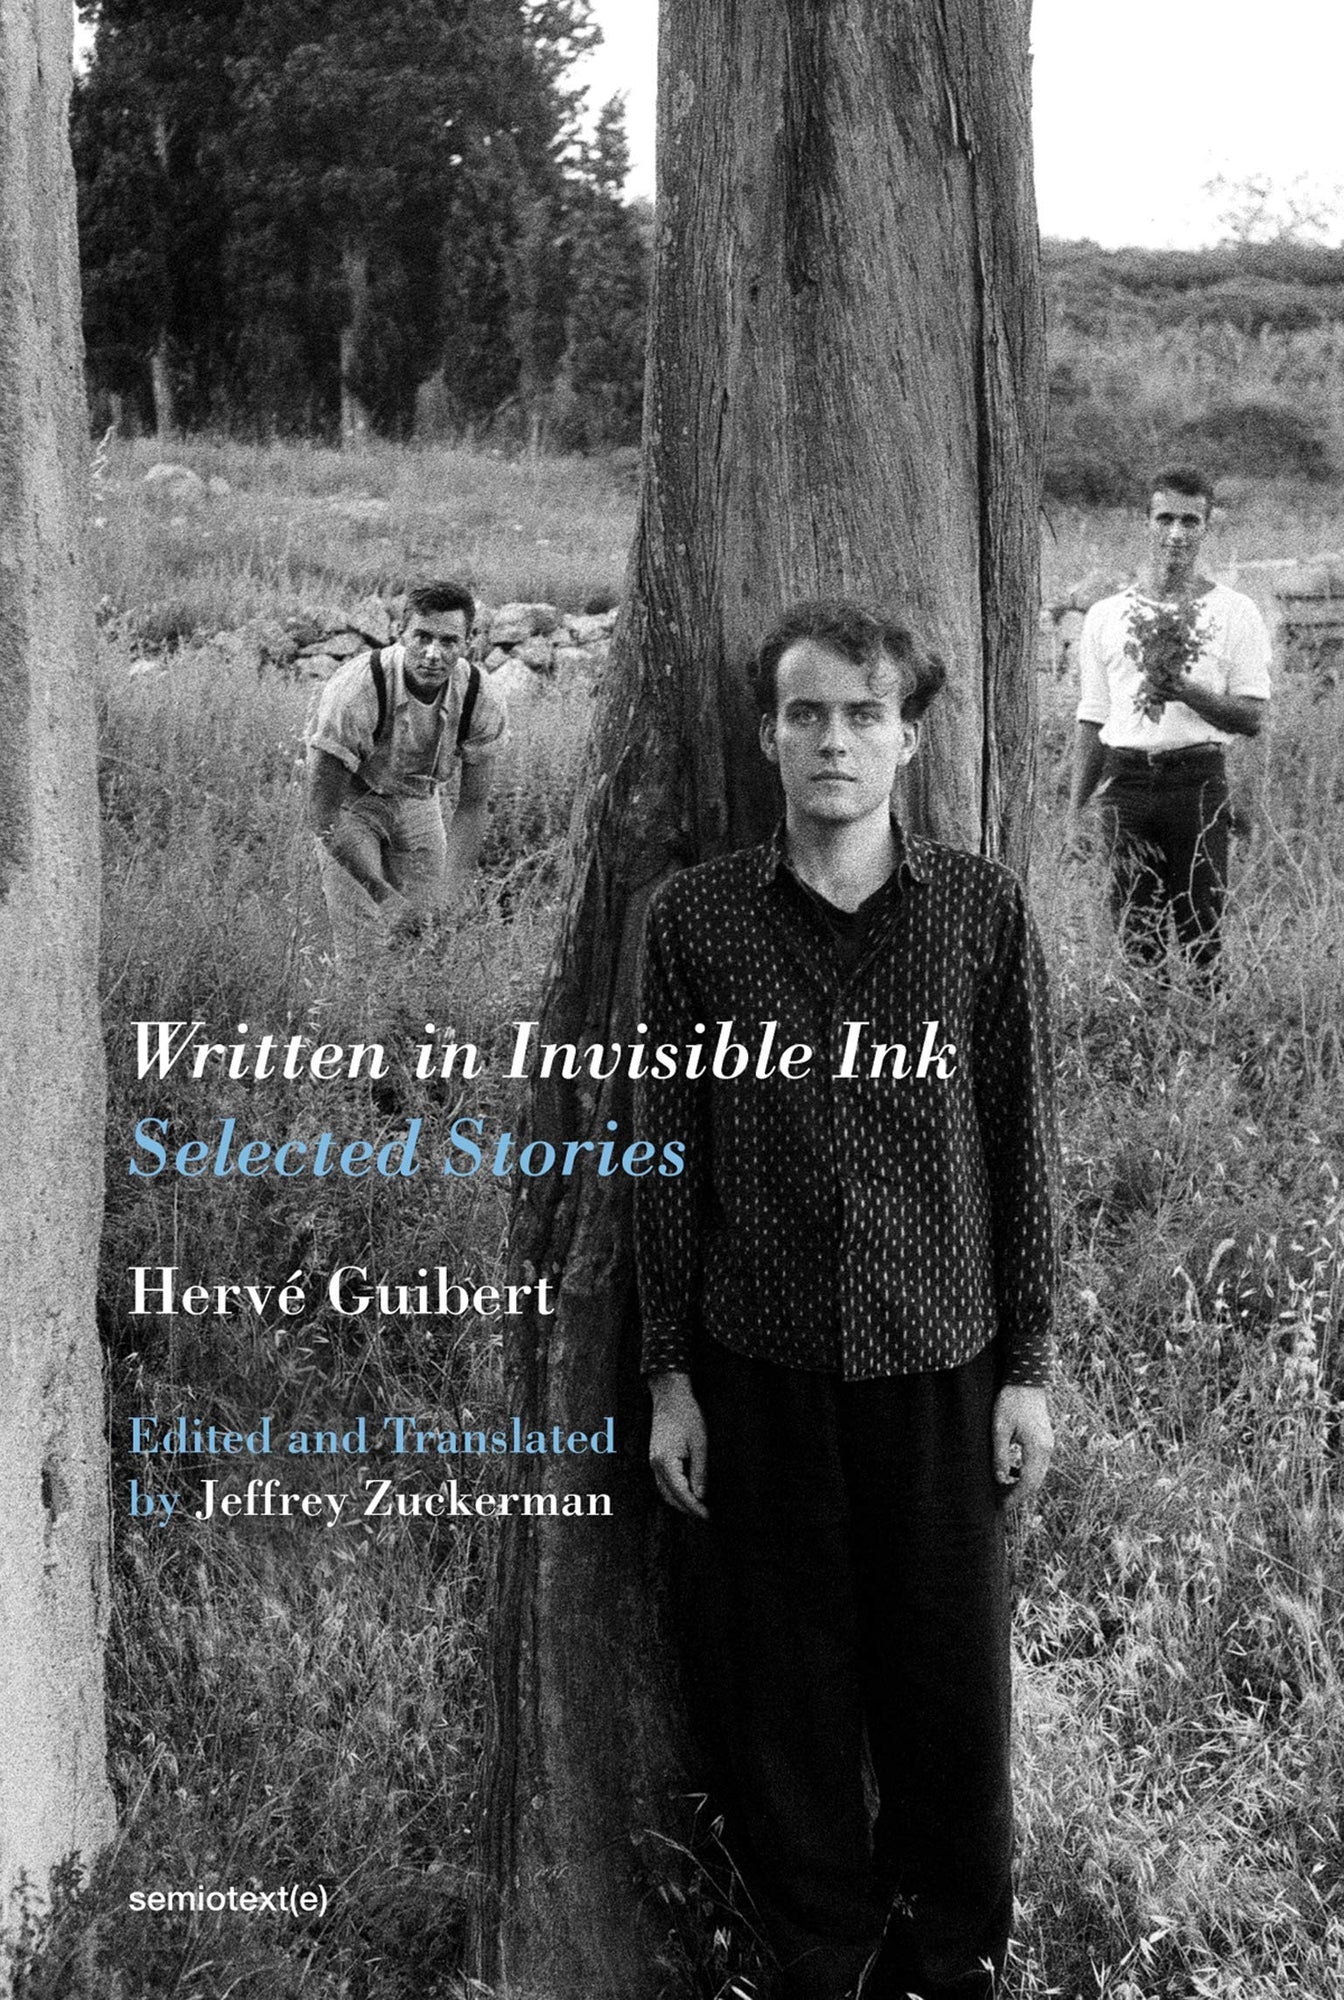  Written in Invisible Ink Selected Stories Hervé Guibert Editied and Translated by Jeffrey Zuckerman in serif white and light blue type with an image of the auhtor standing against a tree and two other men in the backgroud